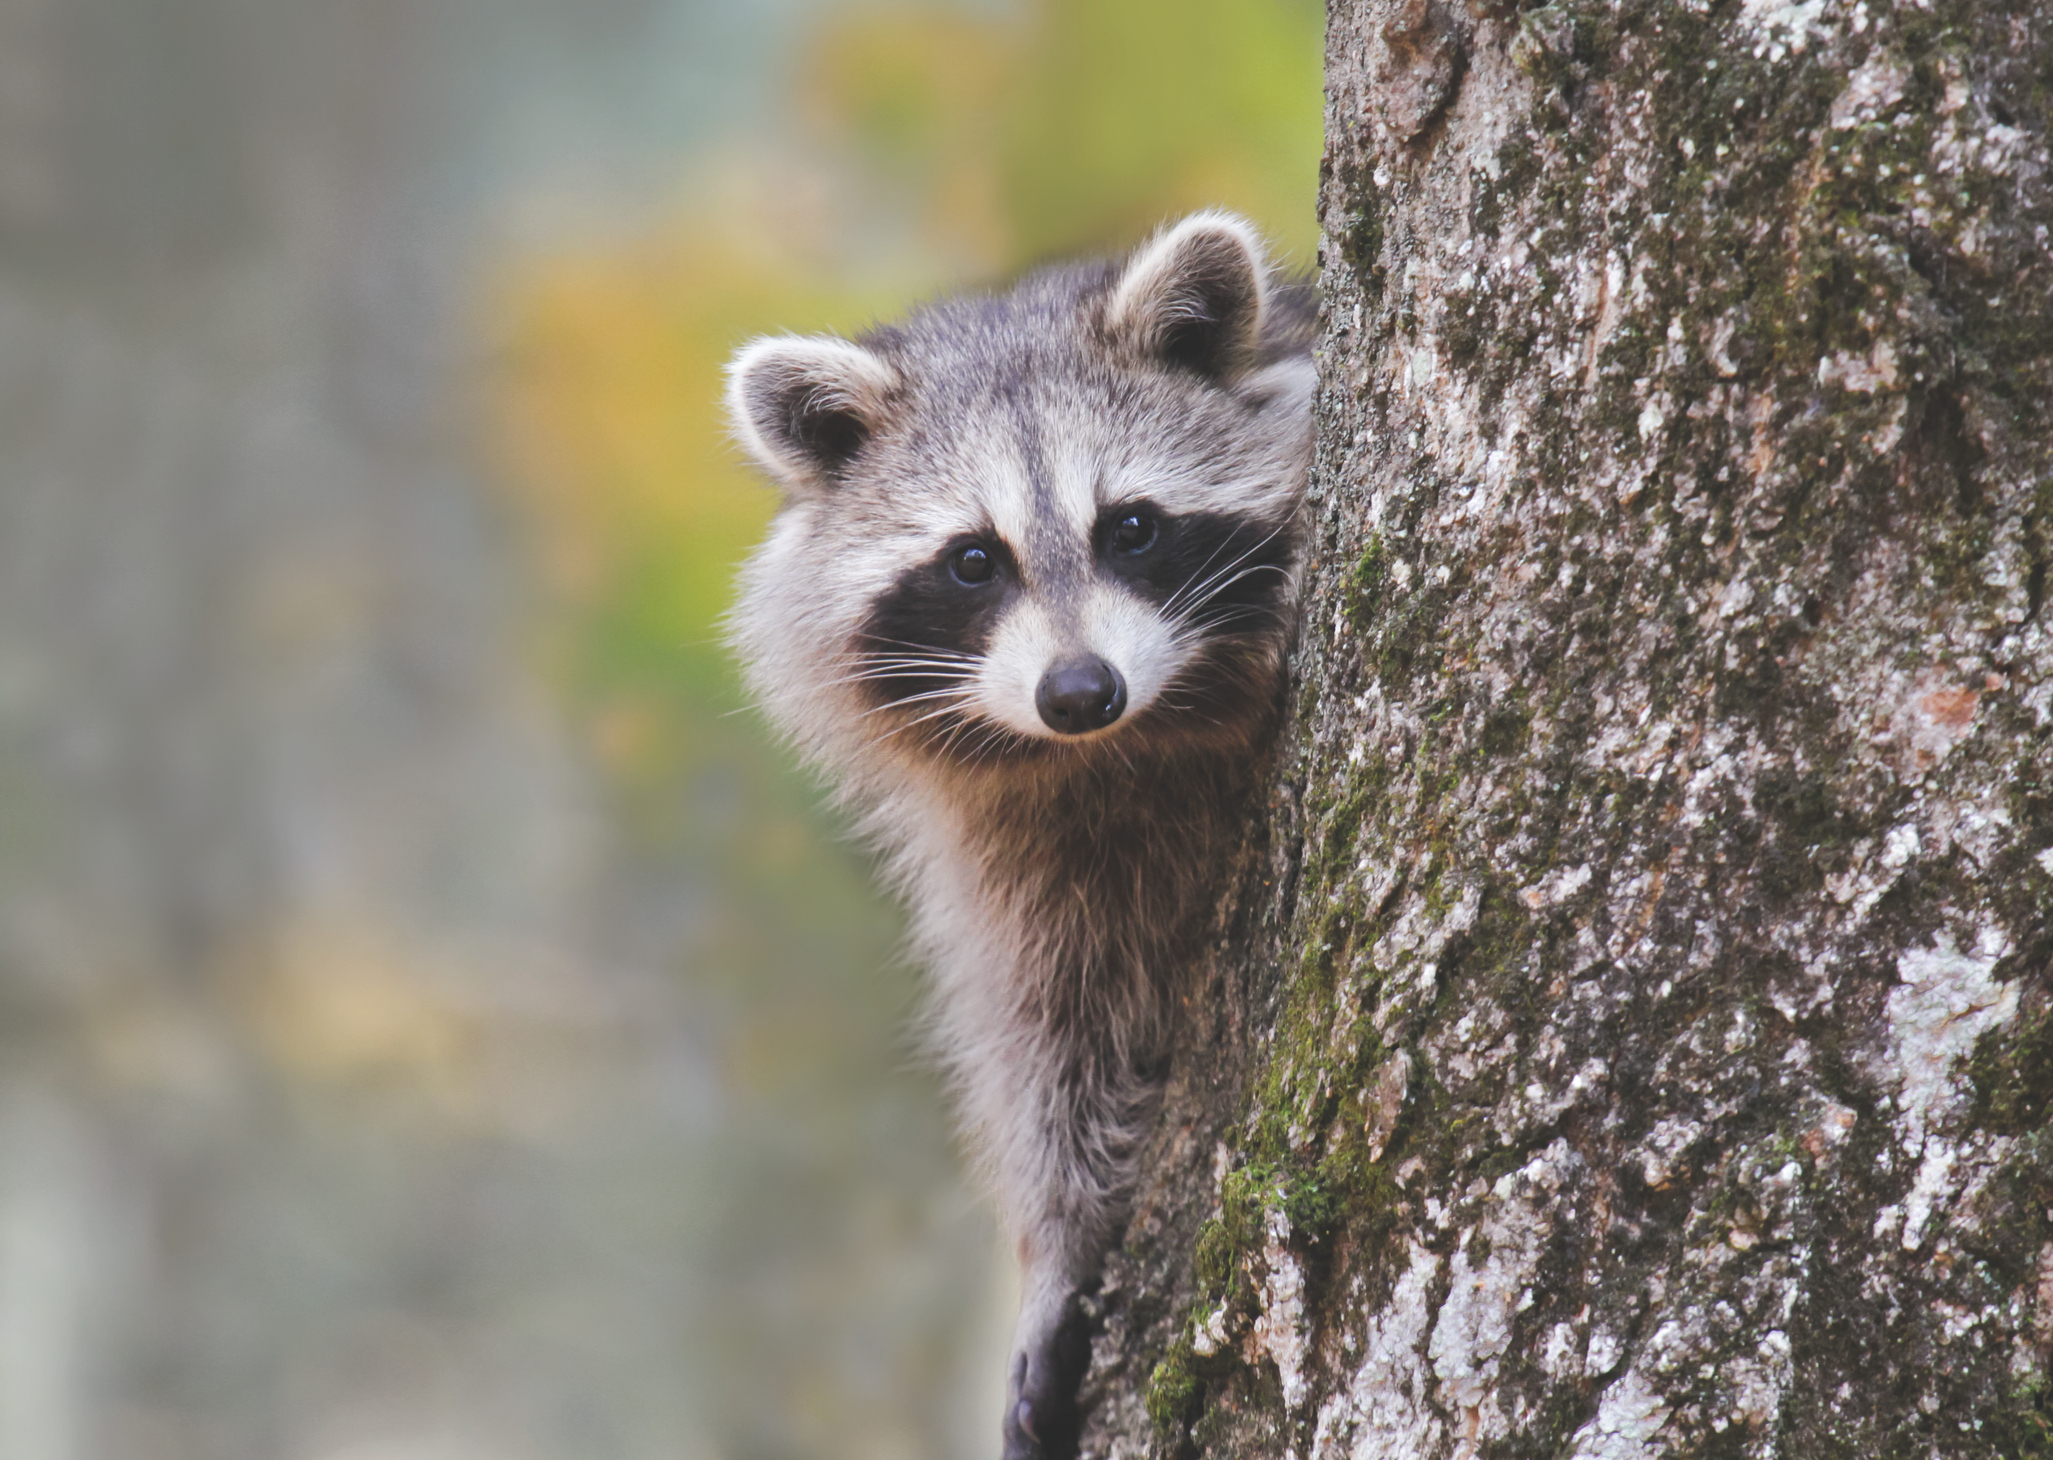 Raccoon peeking out from behind a tree trunk in a natural setting